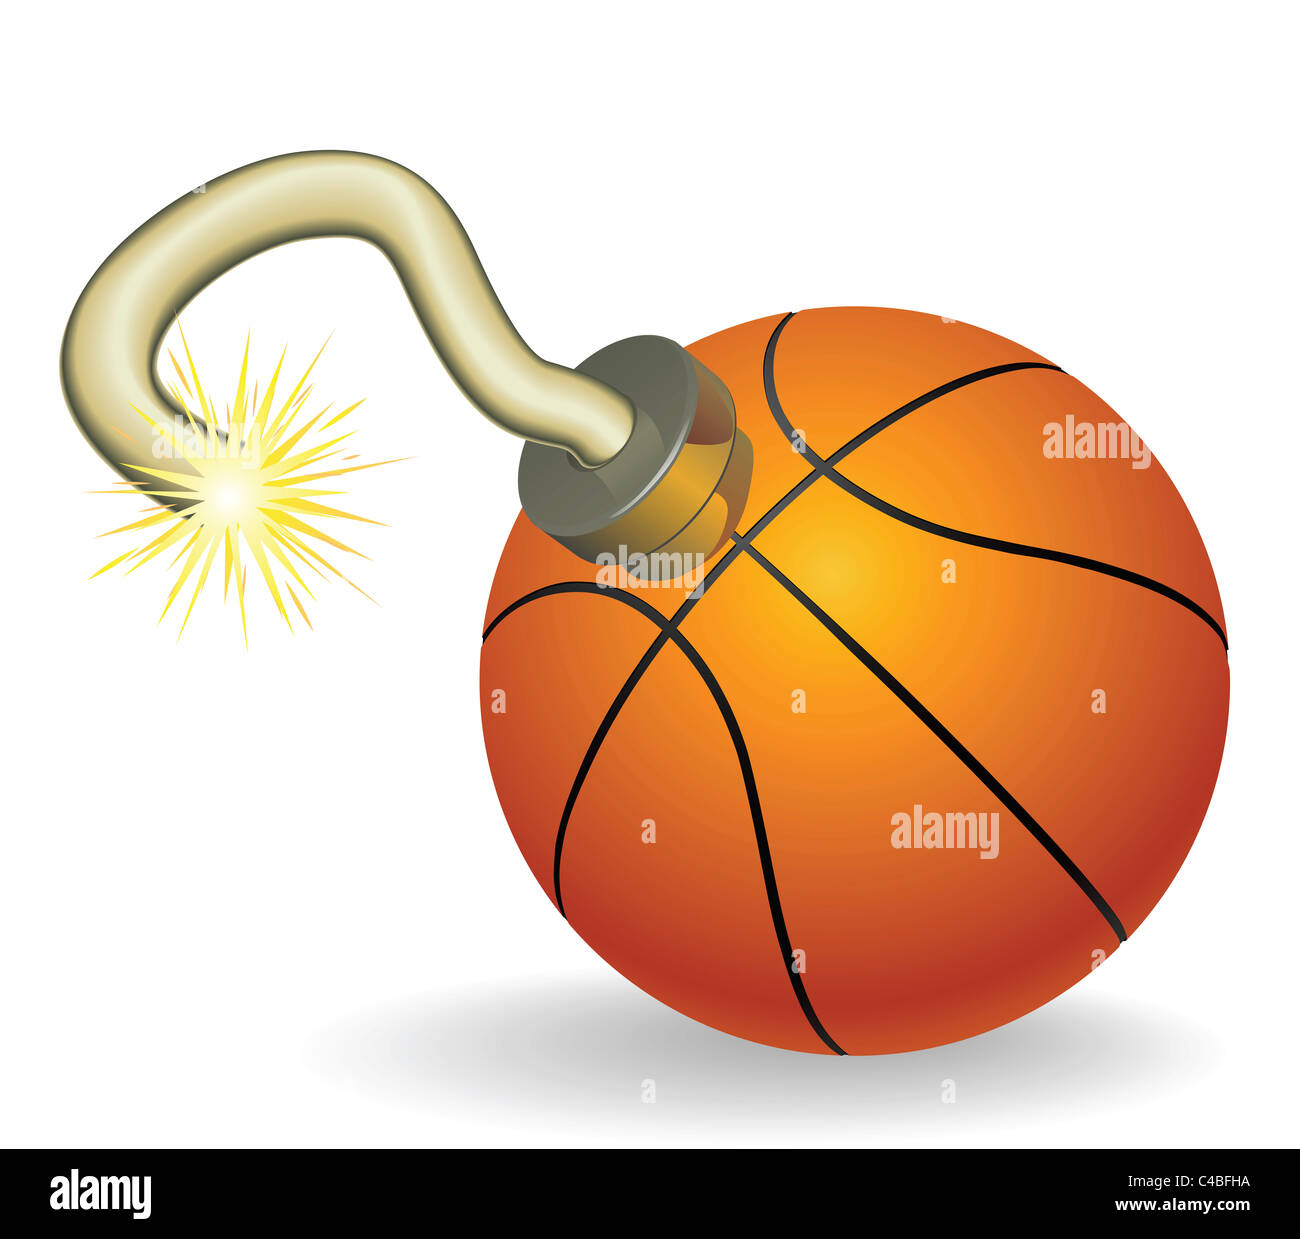 Time bomb in shape of basketball concept. Represents countdown to explosive event or ongoing basketball crisis Stock Photo